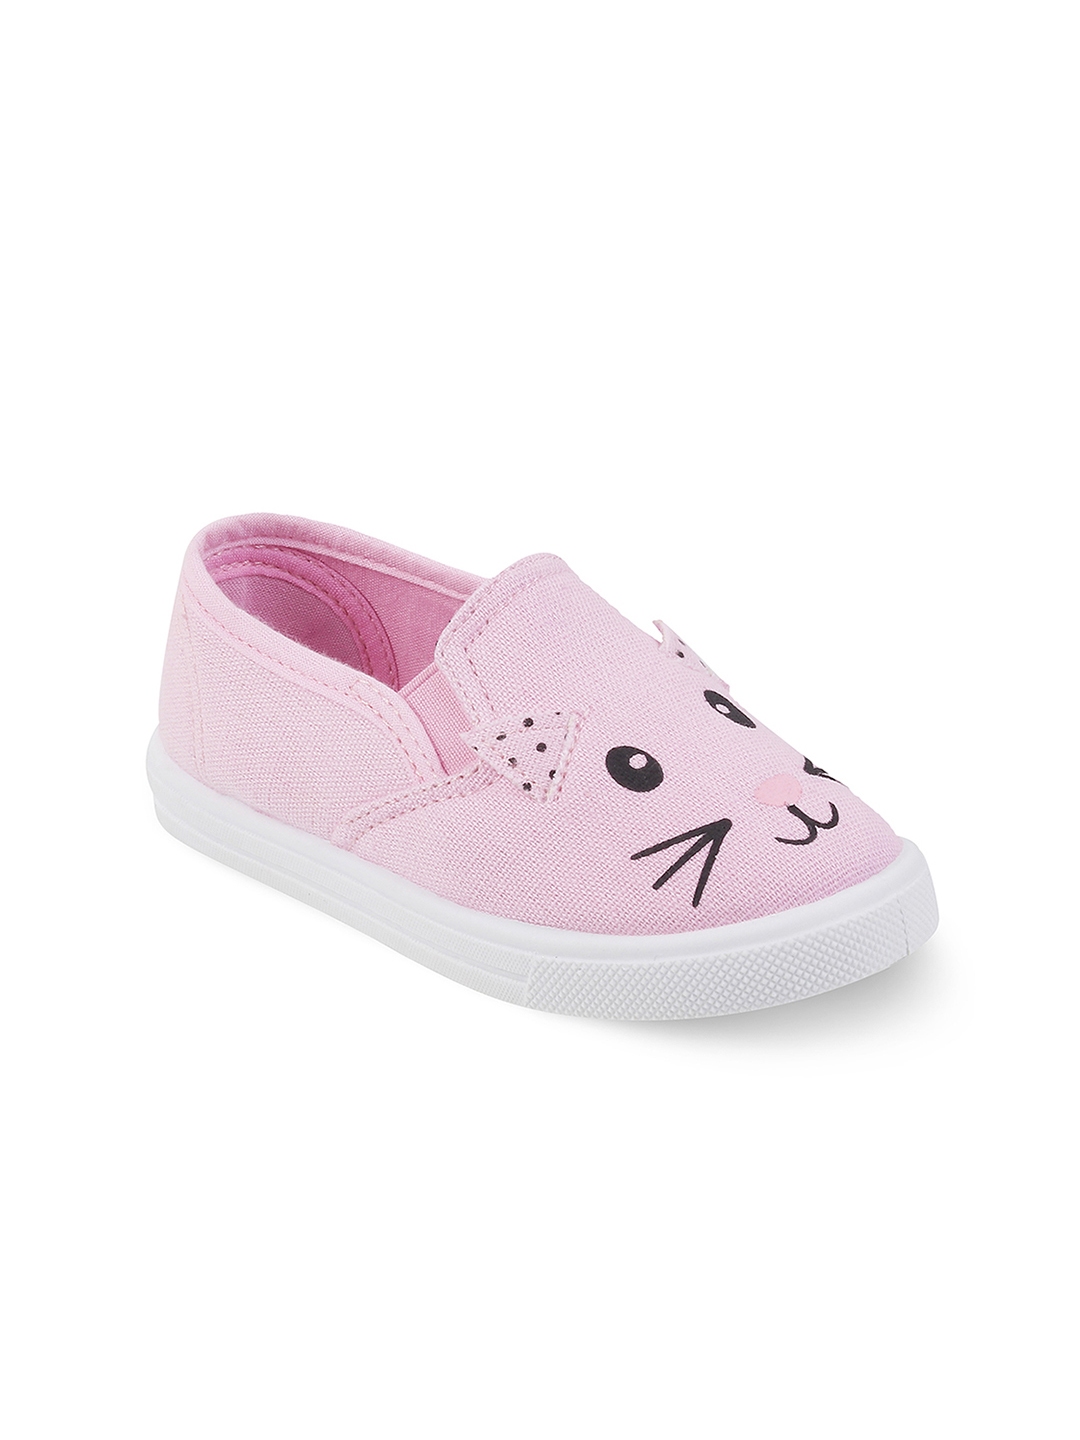 Buy Kittens Girls Pink Slip On Sneakers - Casual Shoes for Girls ...